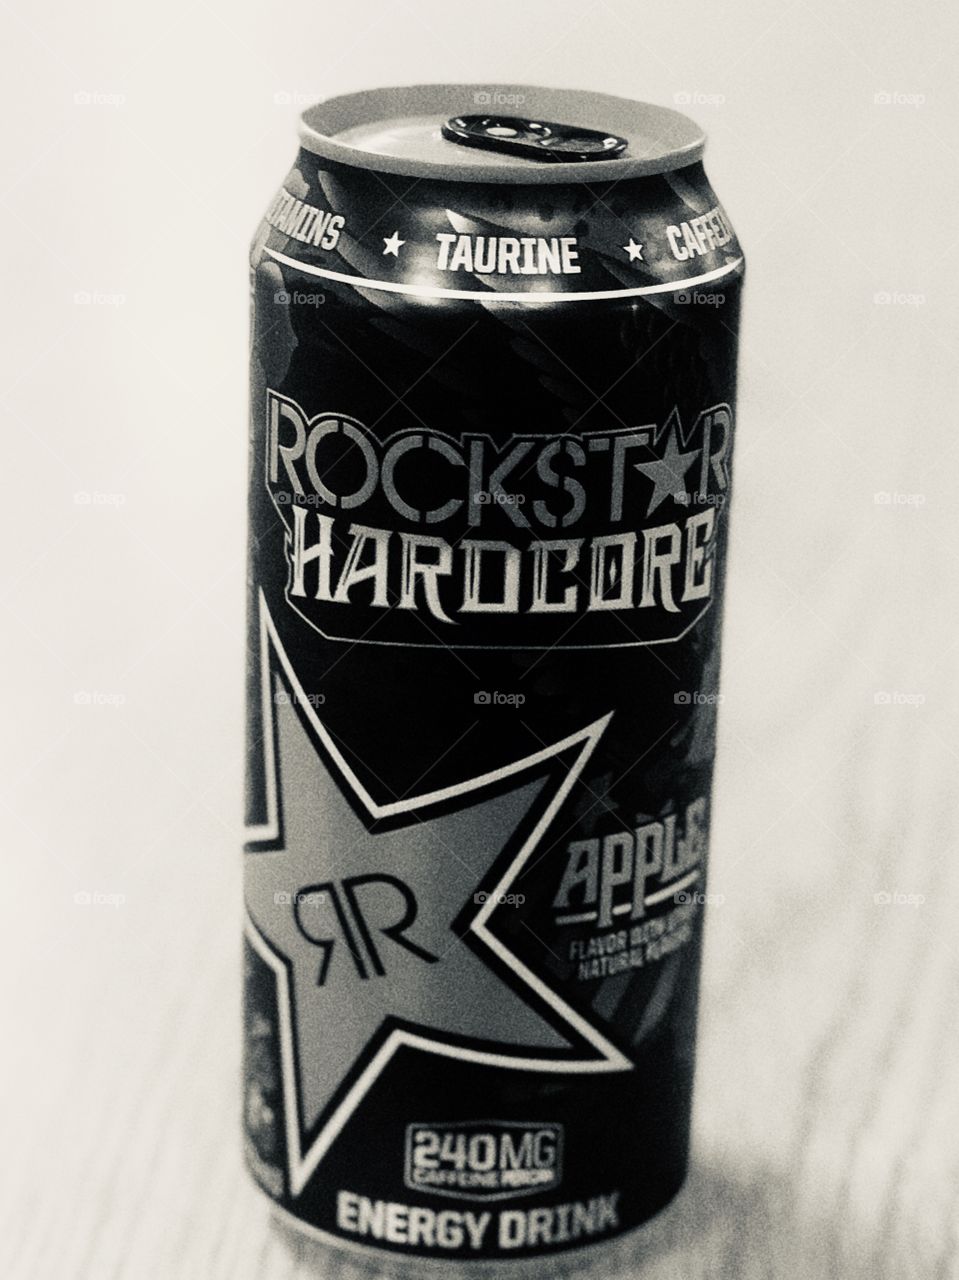 Rockstar, the life blood that fuels the night. 